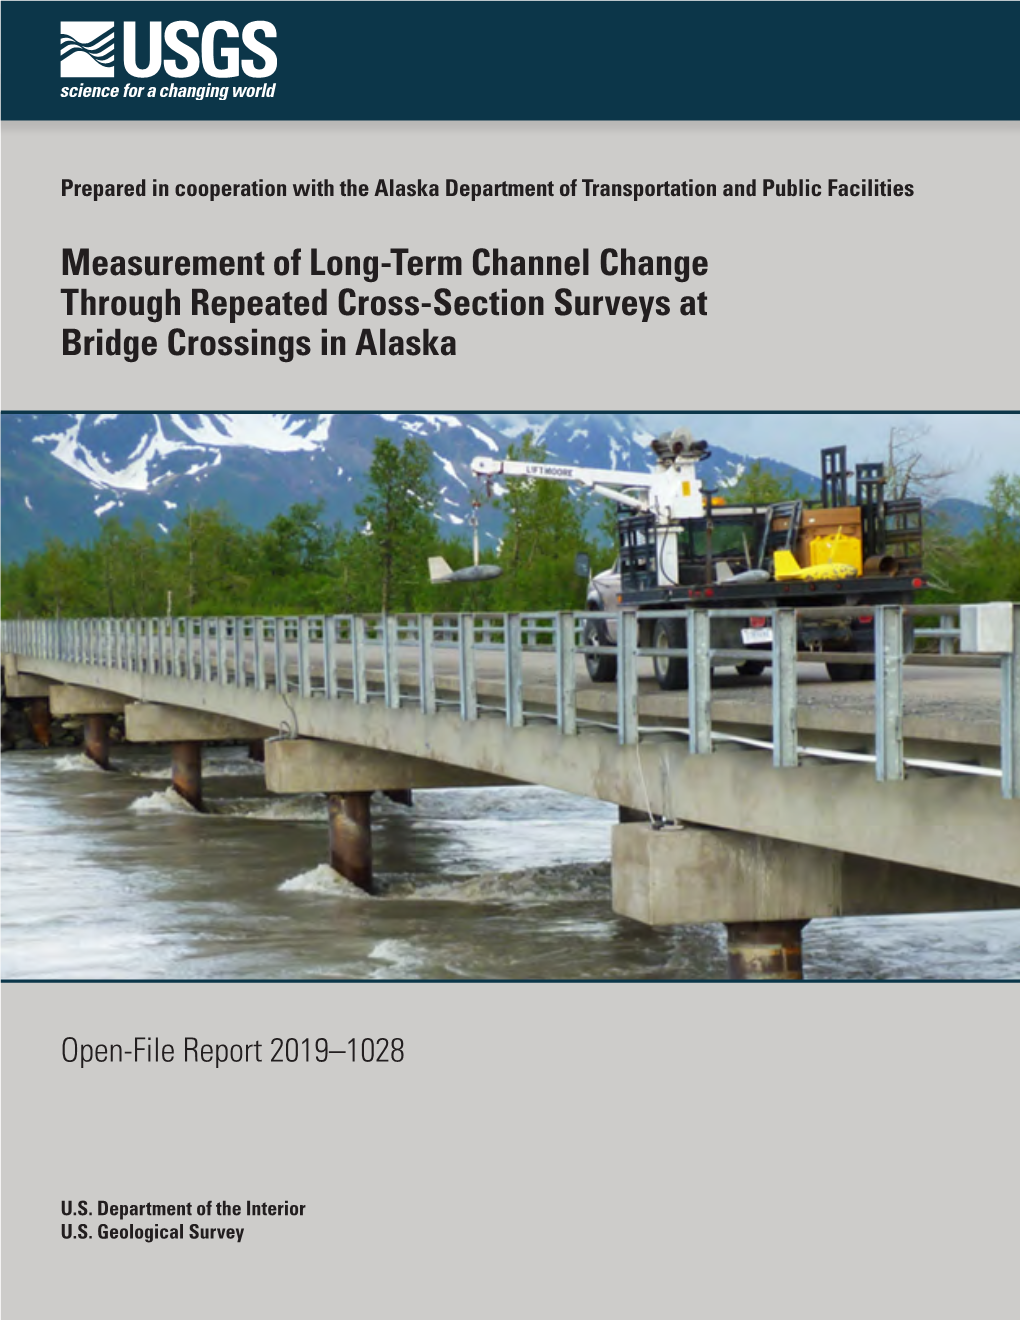 Measurement of Long-Term Channel Change Through Repeated Cross-Section Surveys at Bridge Crossings in Alaska